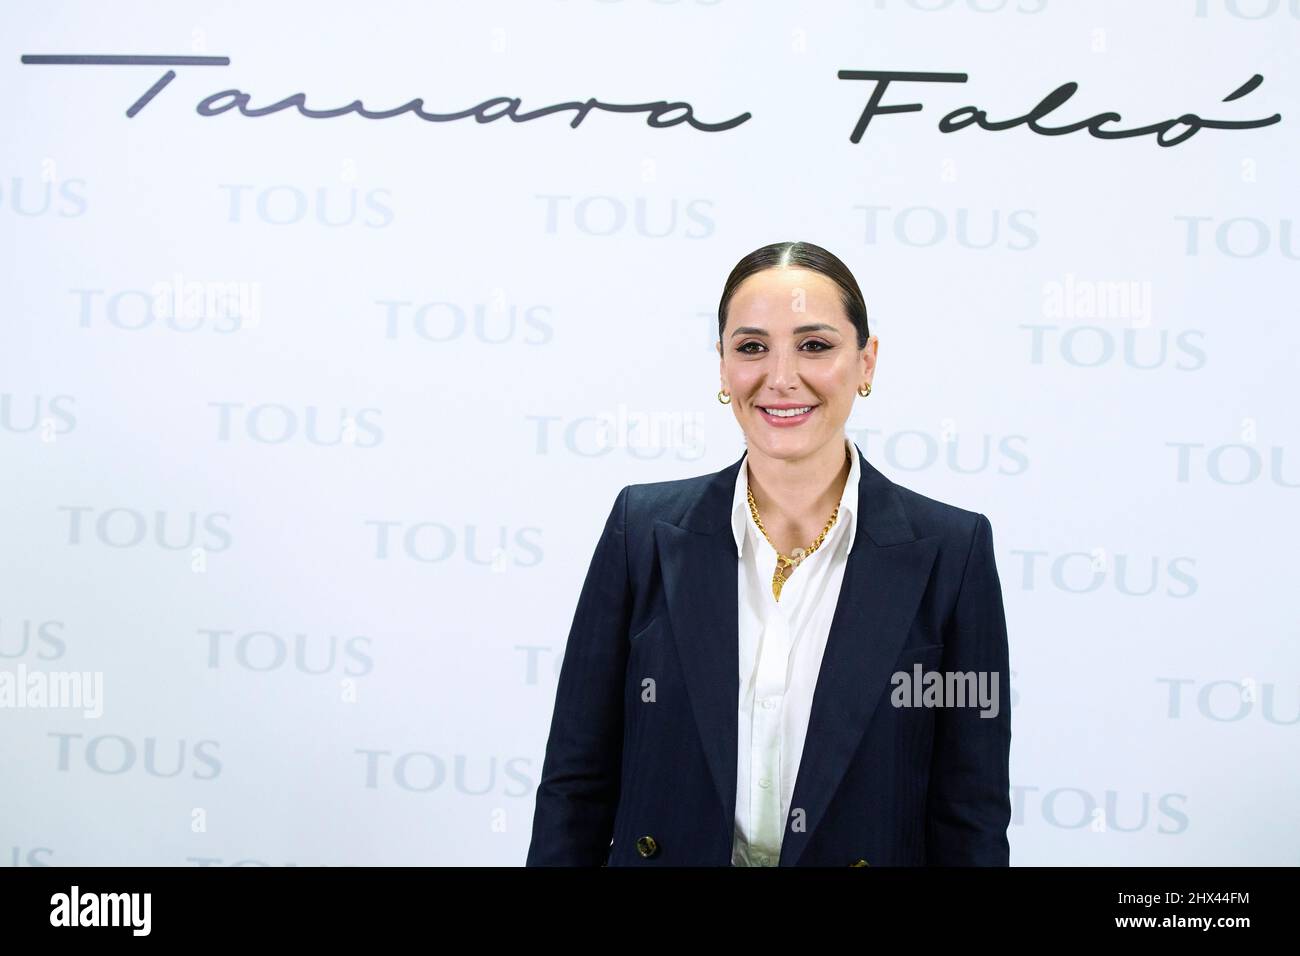 Madrid. Spain. 20220309,  Tamara Falco presents the new Tamara Falco x TOUS collection  at the Tous store on March 9, 2022 in Madrid, Spain Stock Photo